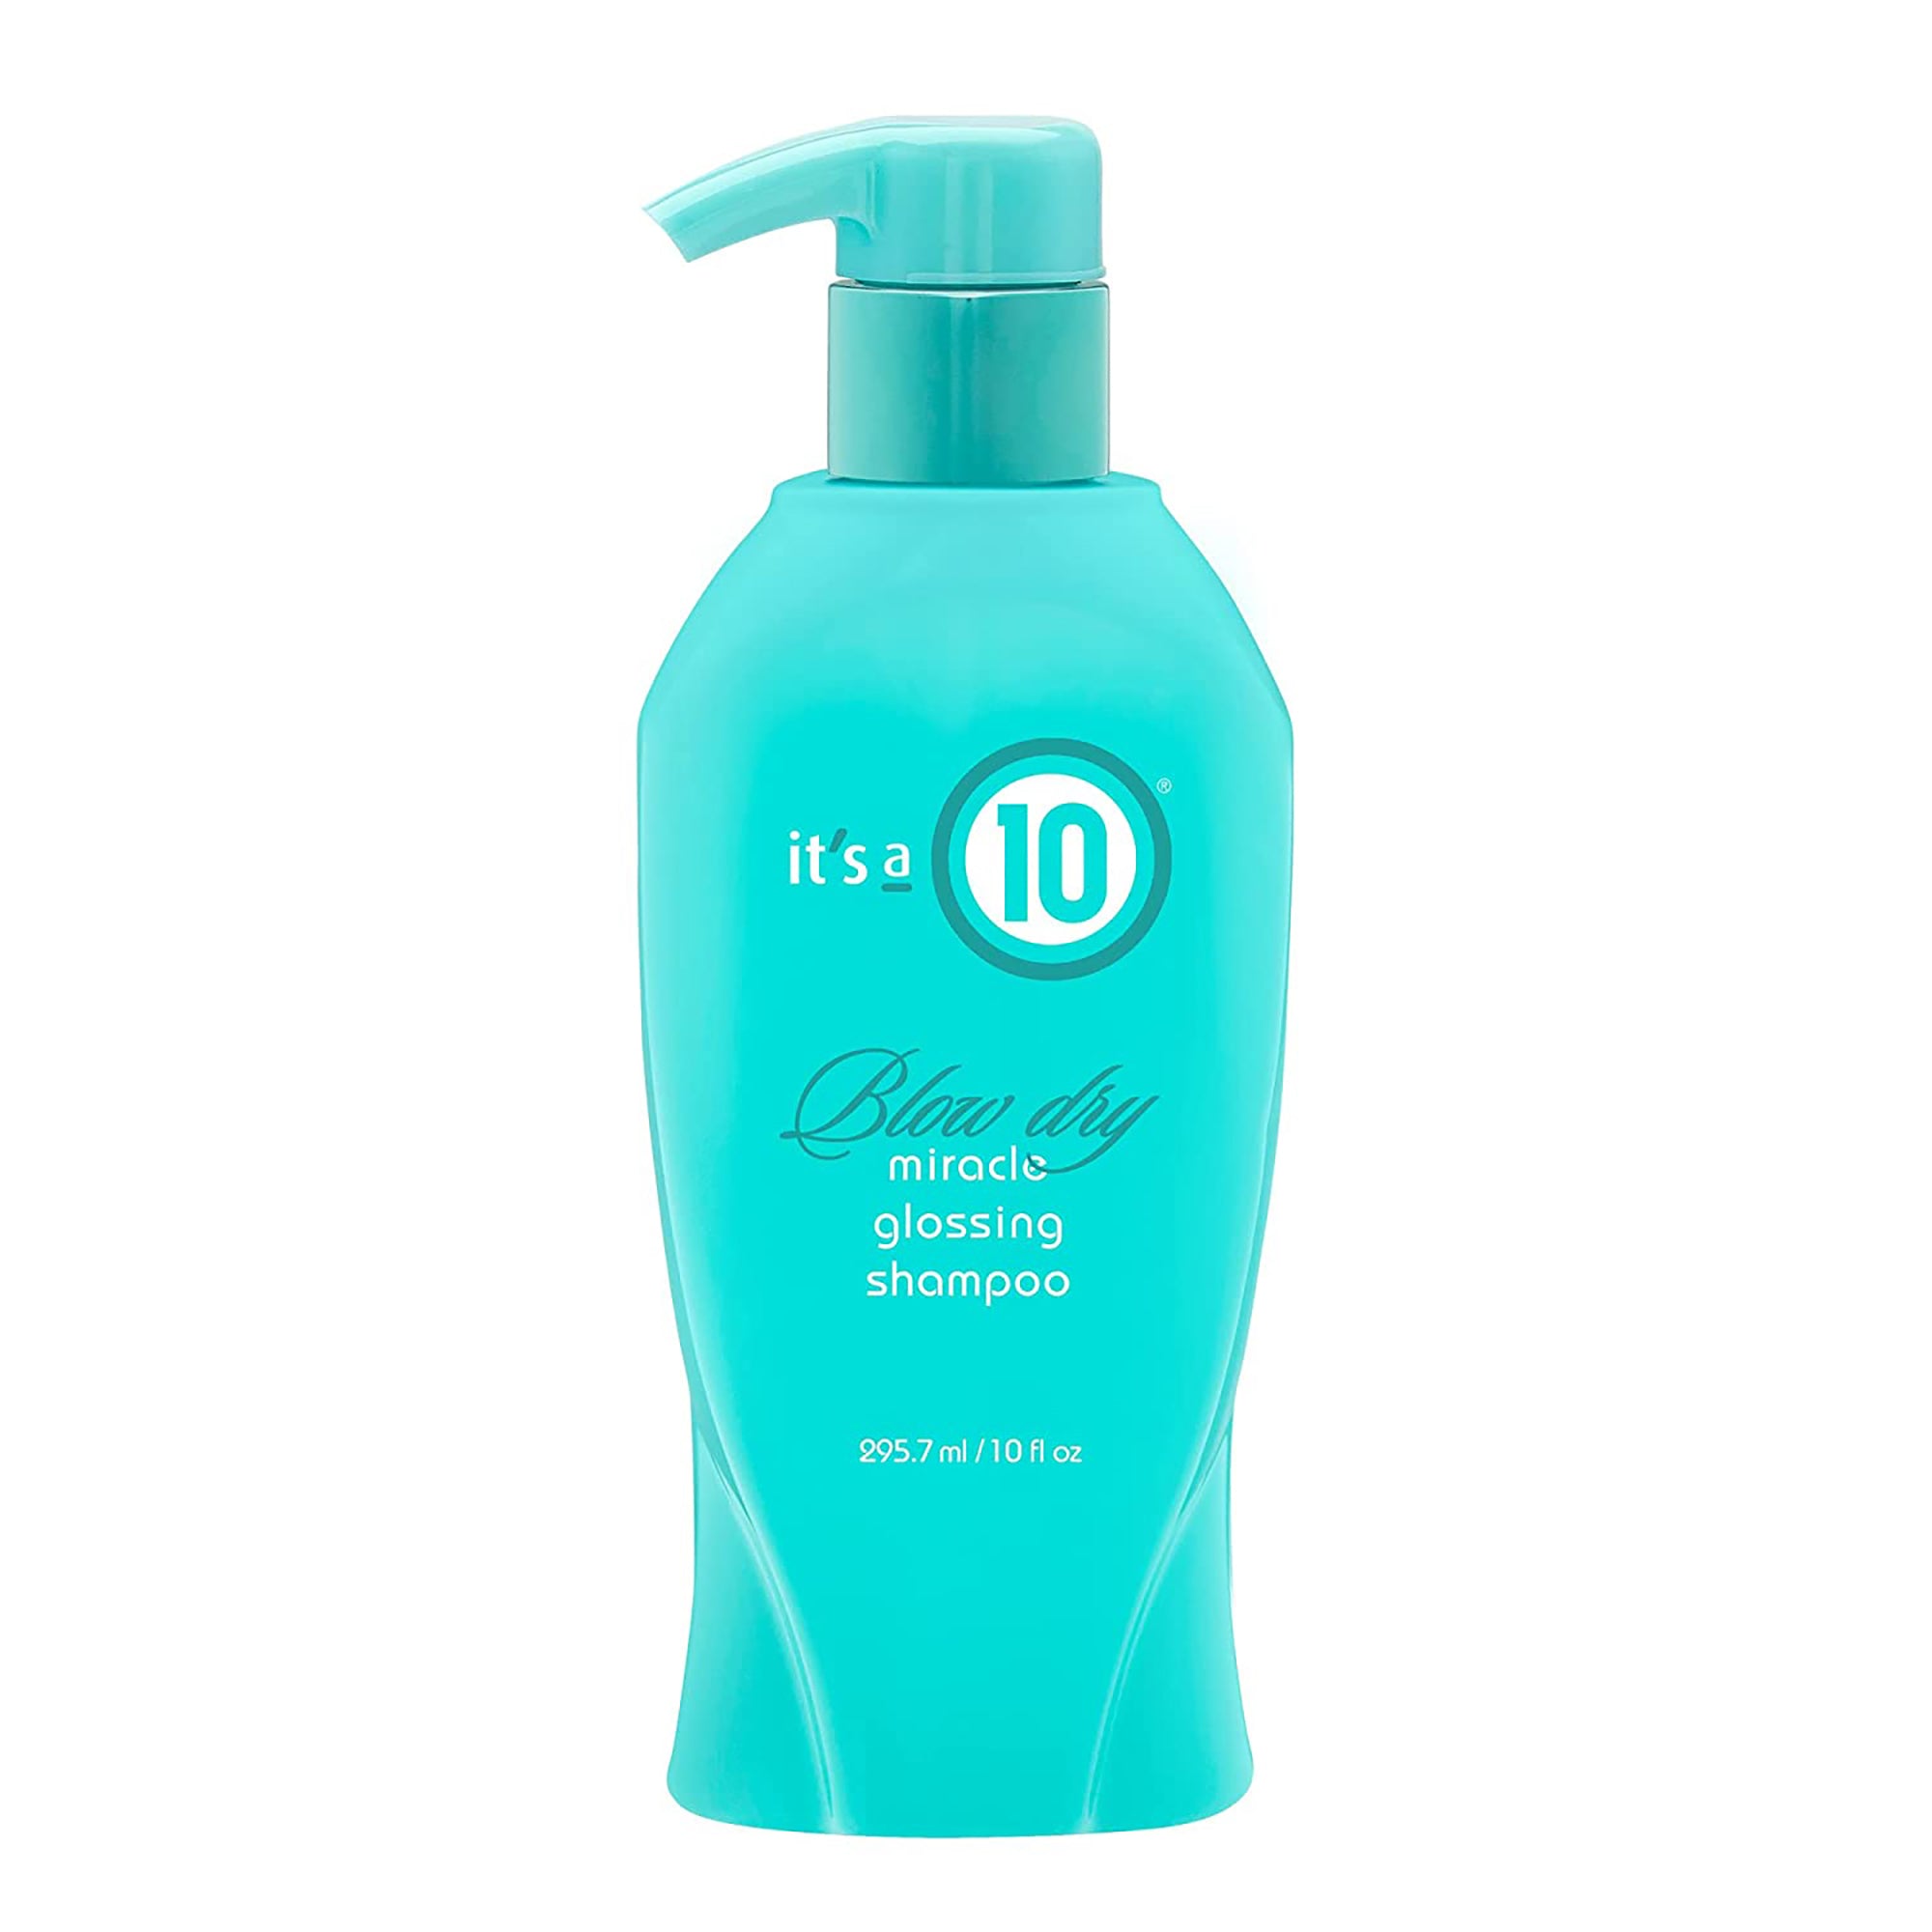 It's a 10 Blow Dry Miracle Glossing Shampoo - 10oz / 10.OZ